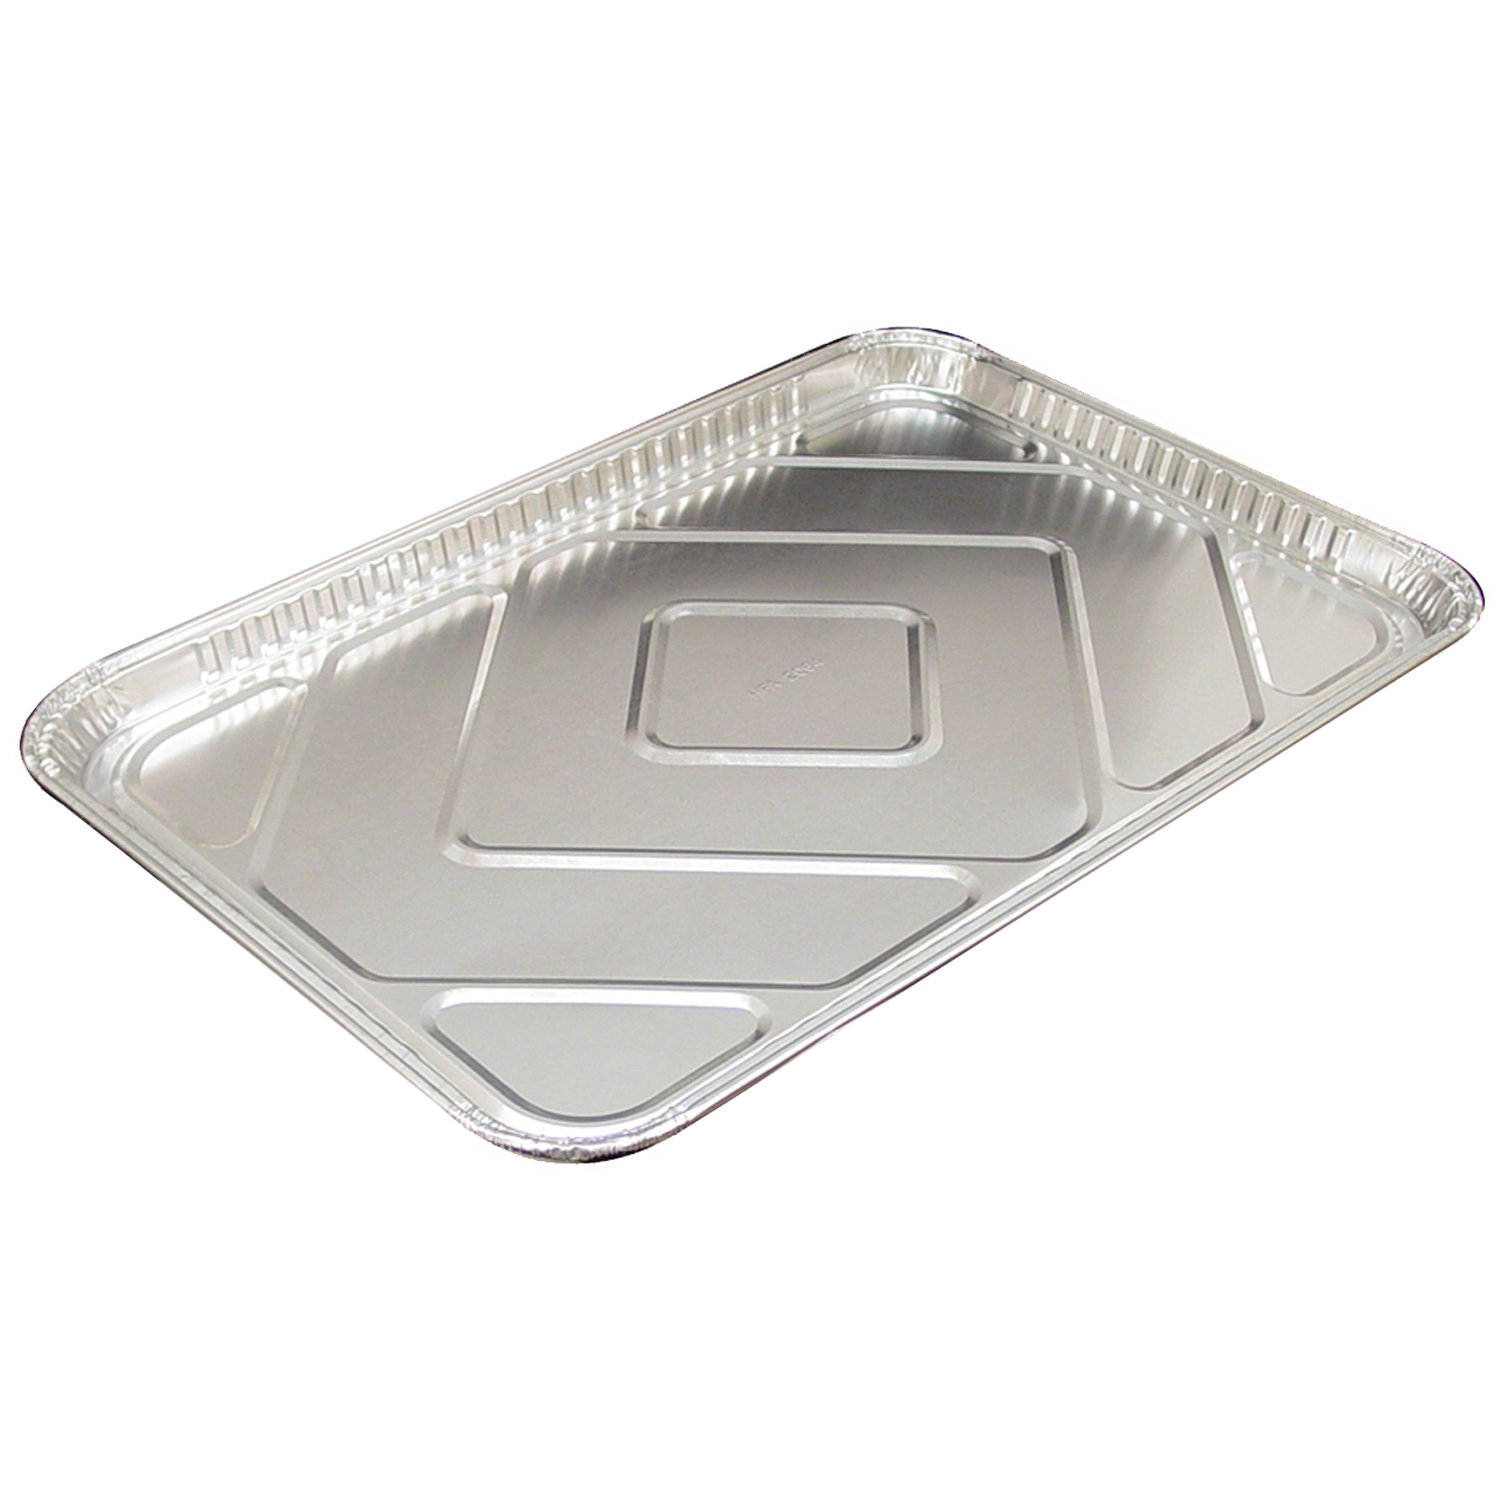 16 x 11 Oblong Cookie Sheet Disposable Aluminum Foil Baking Pan Trays  (Pack of 20)